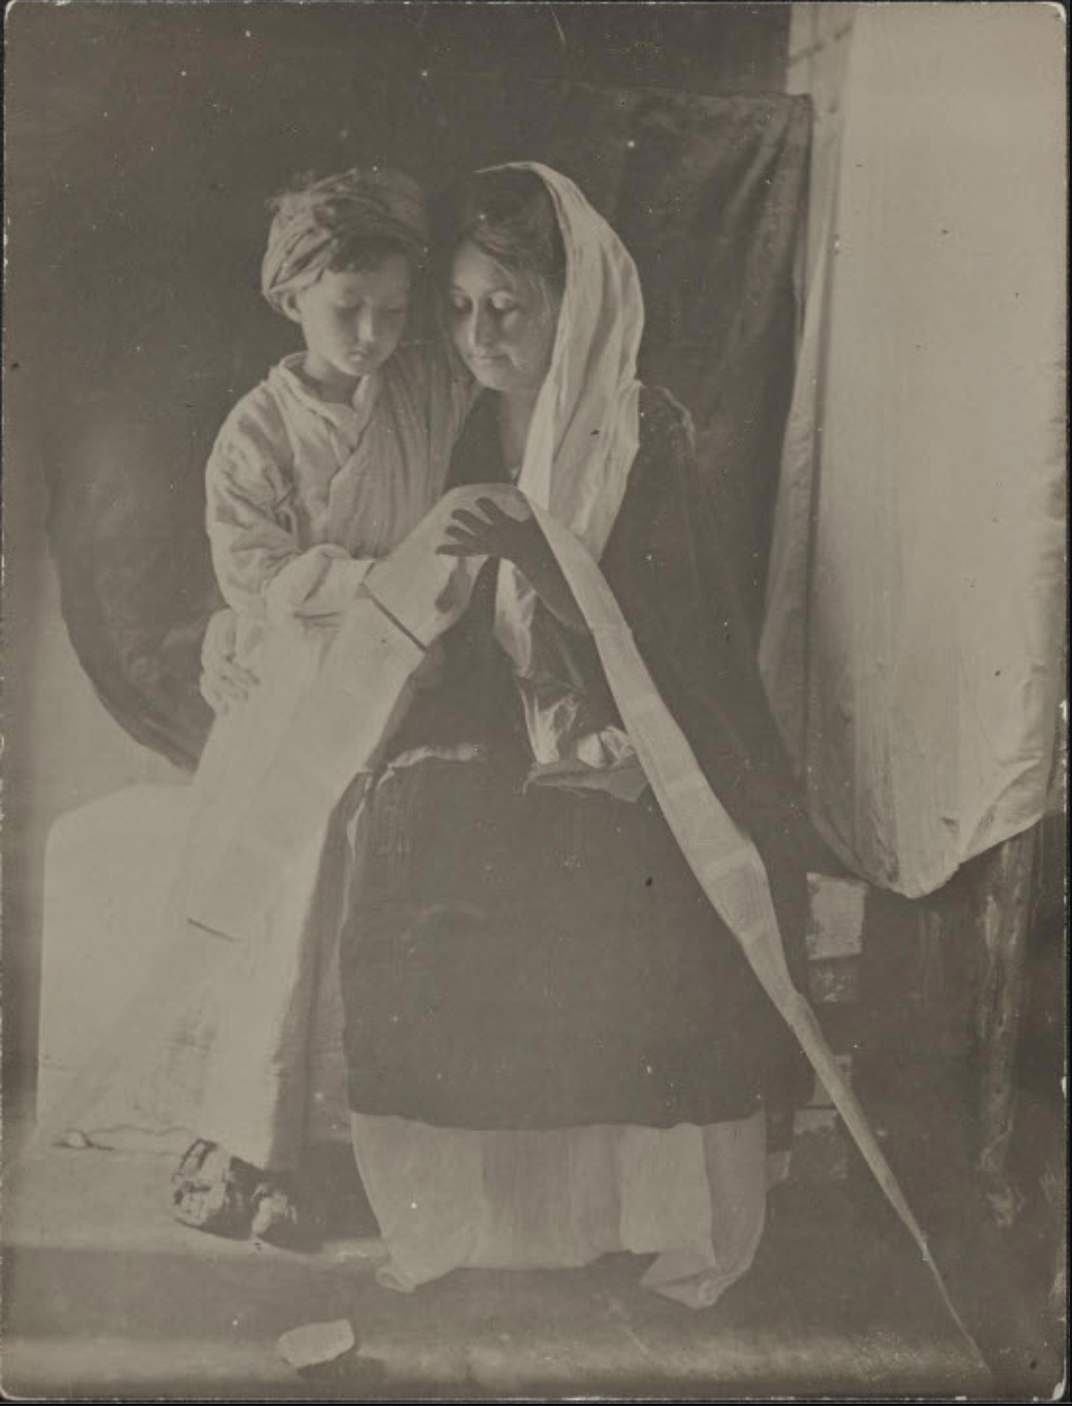 Black-and-white photograph of a seated woman with a white cloth draped over her head, embraced by a young child wearing a white robe. Together they are reading something on a long scroll that drapes over the woman's lap.